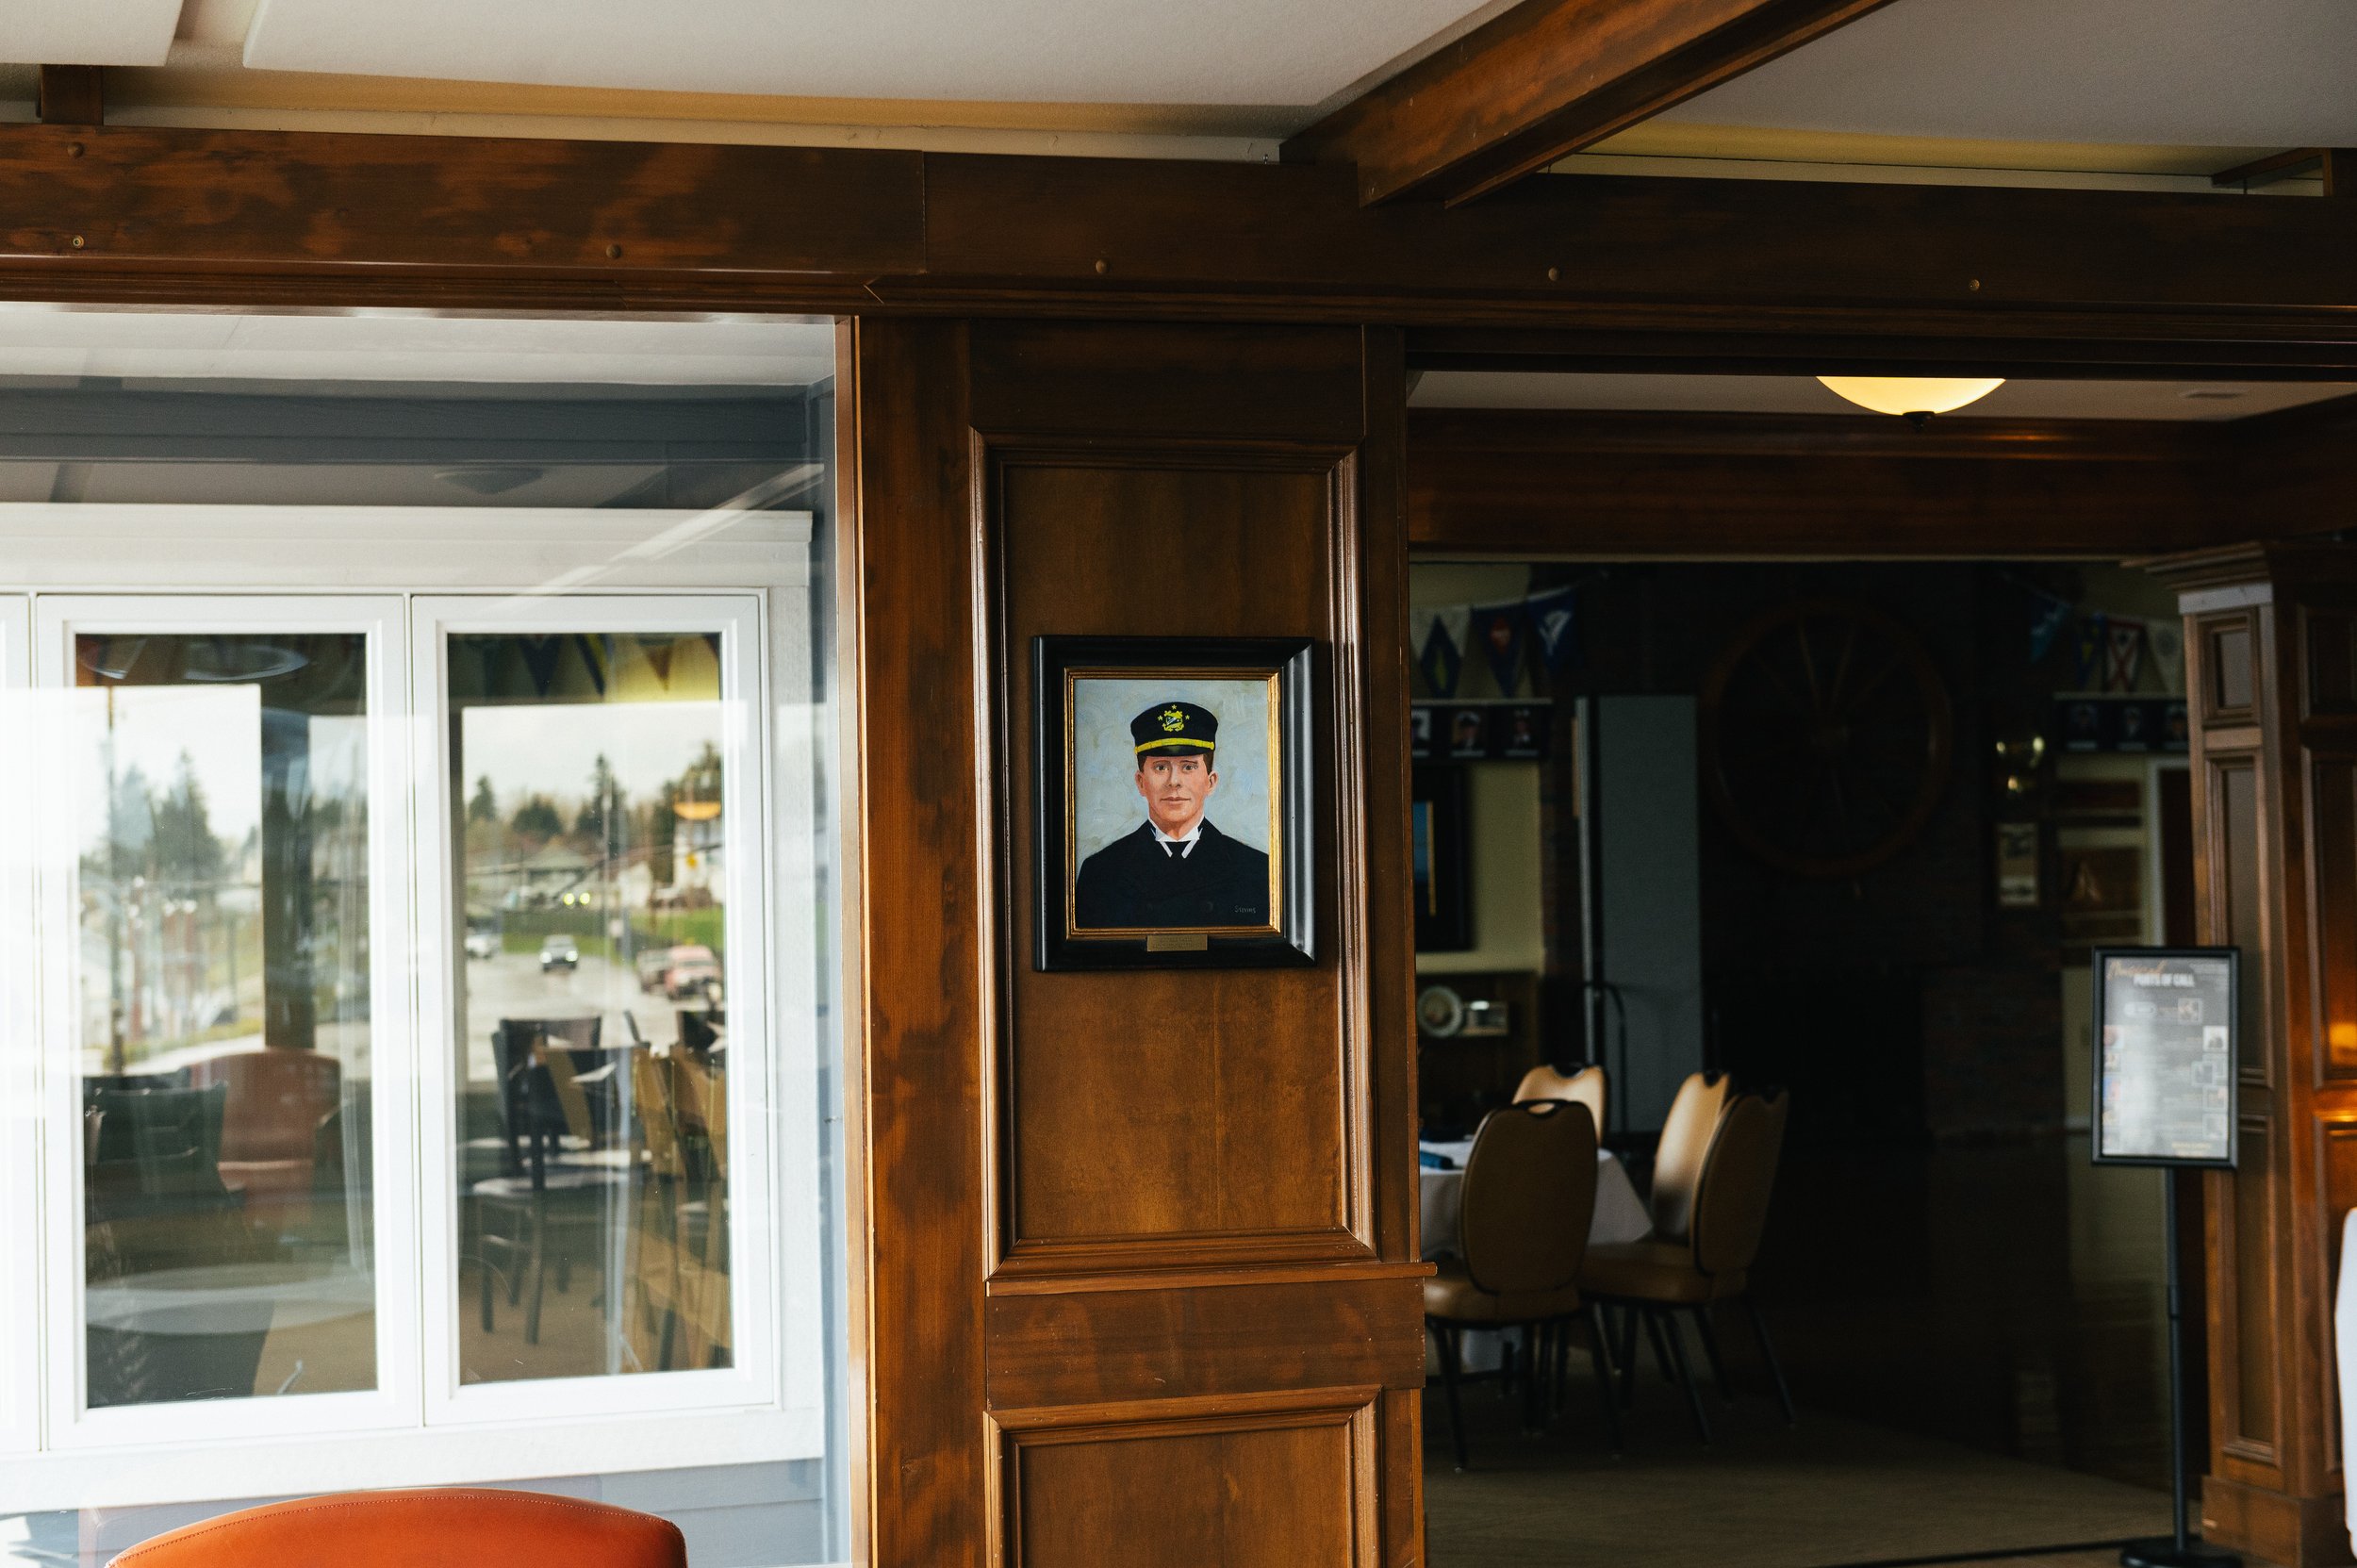 A sailor-themed picture on the wall in the office of GEOFF HELZER - THE SECOND WIND, PORTLAND, OR